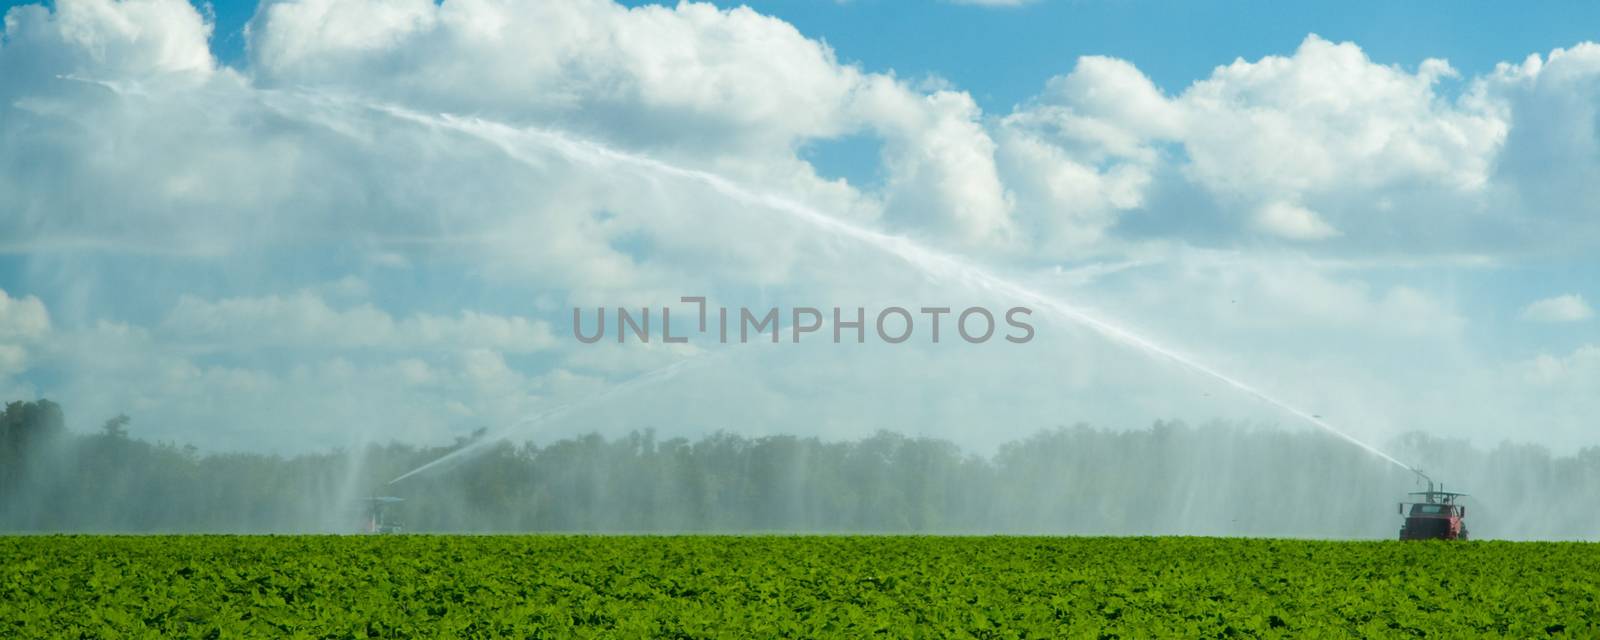 Scenic view of trucks irrigating green field in countryside with cloudscape background.